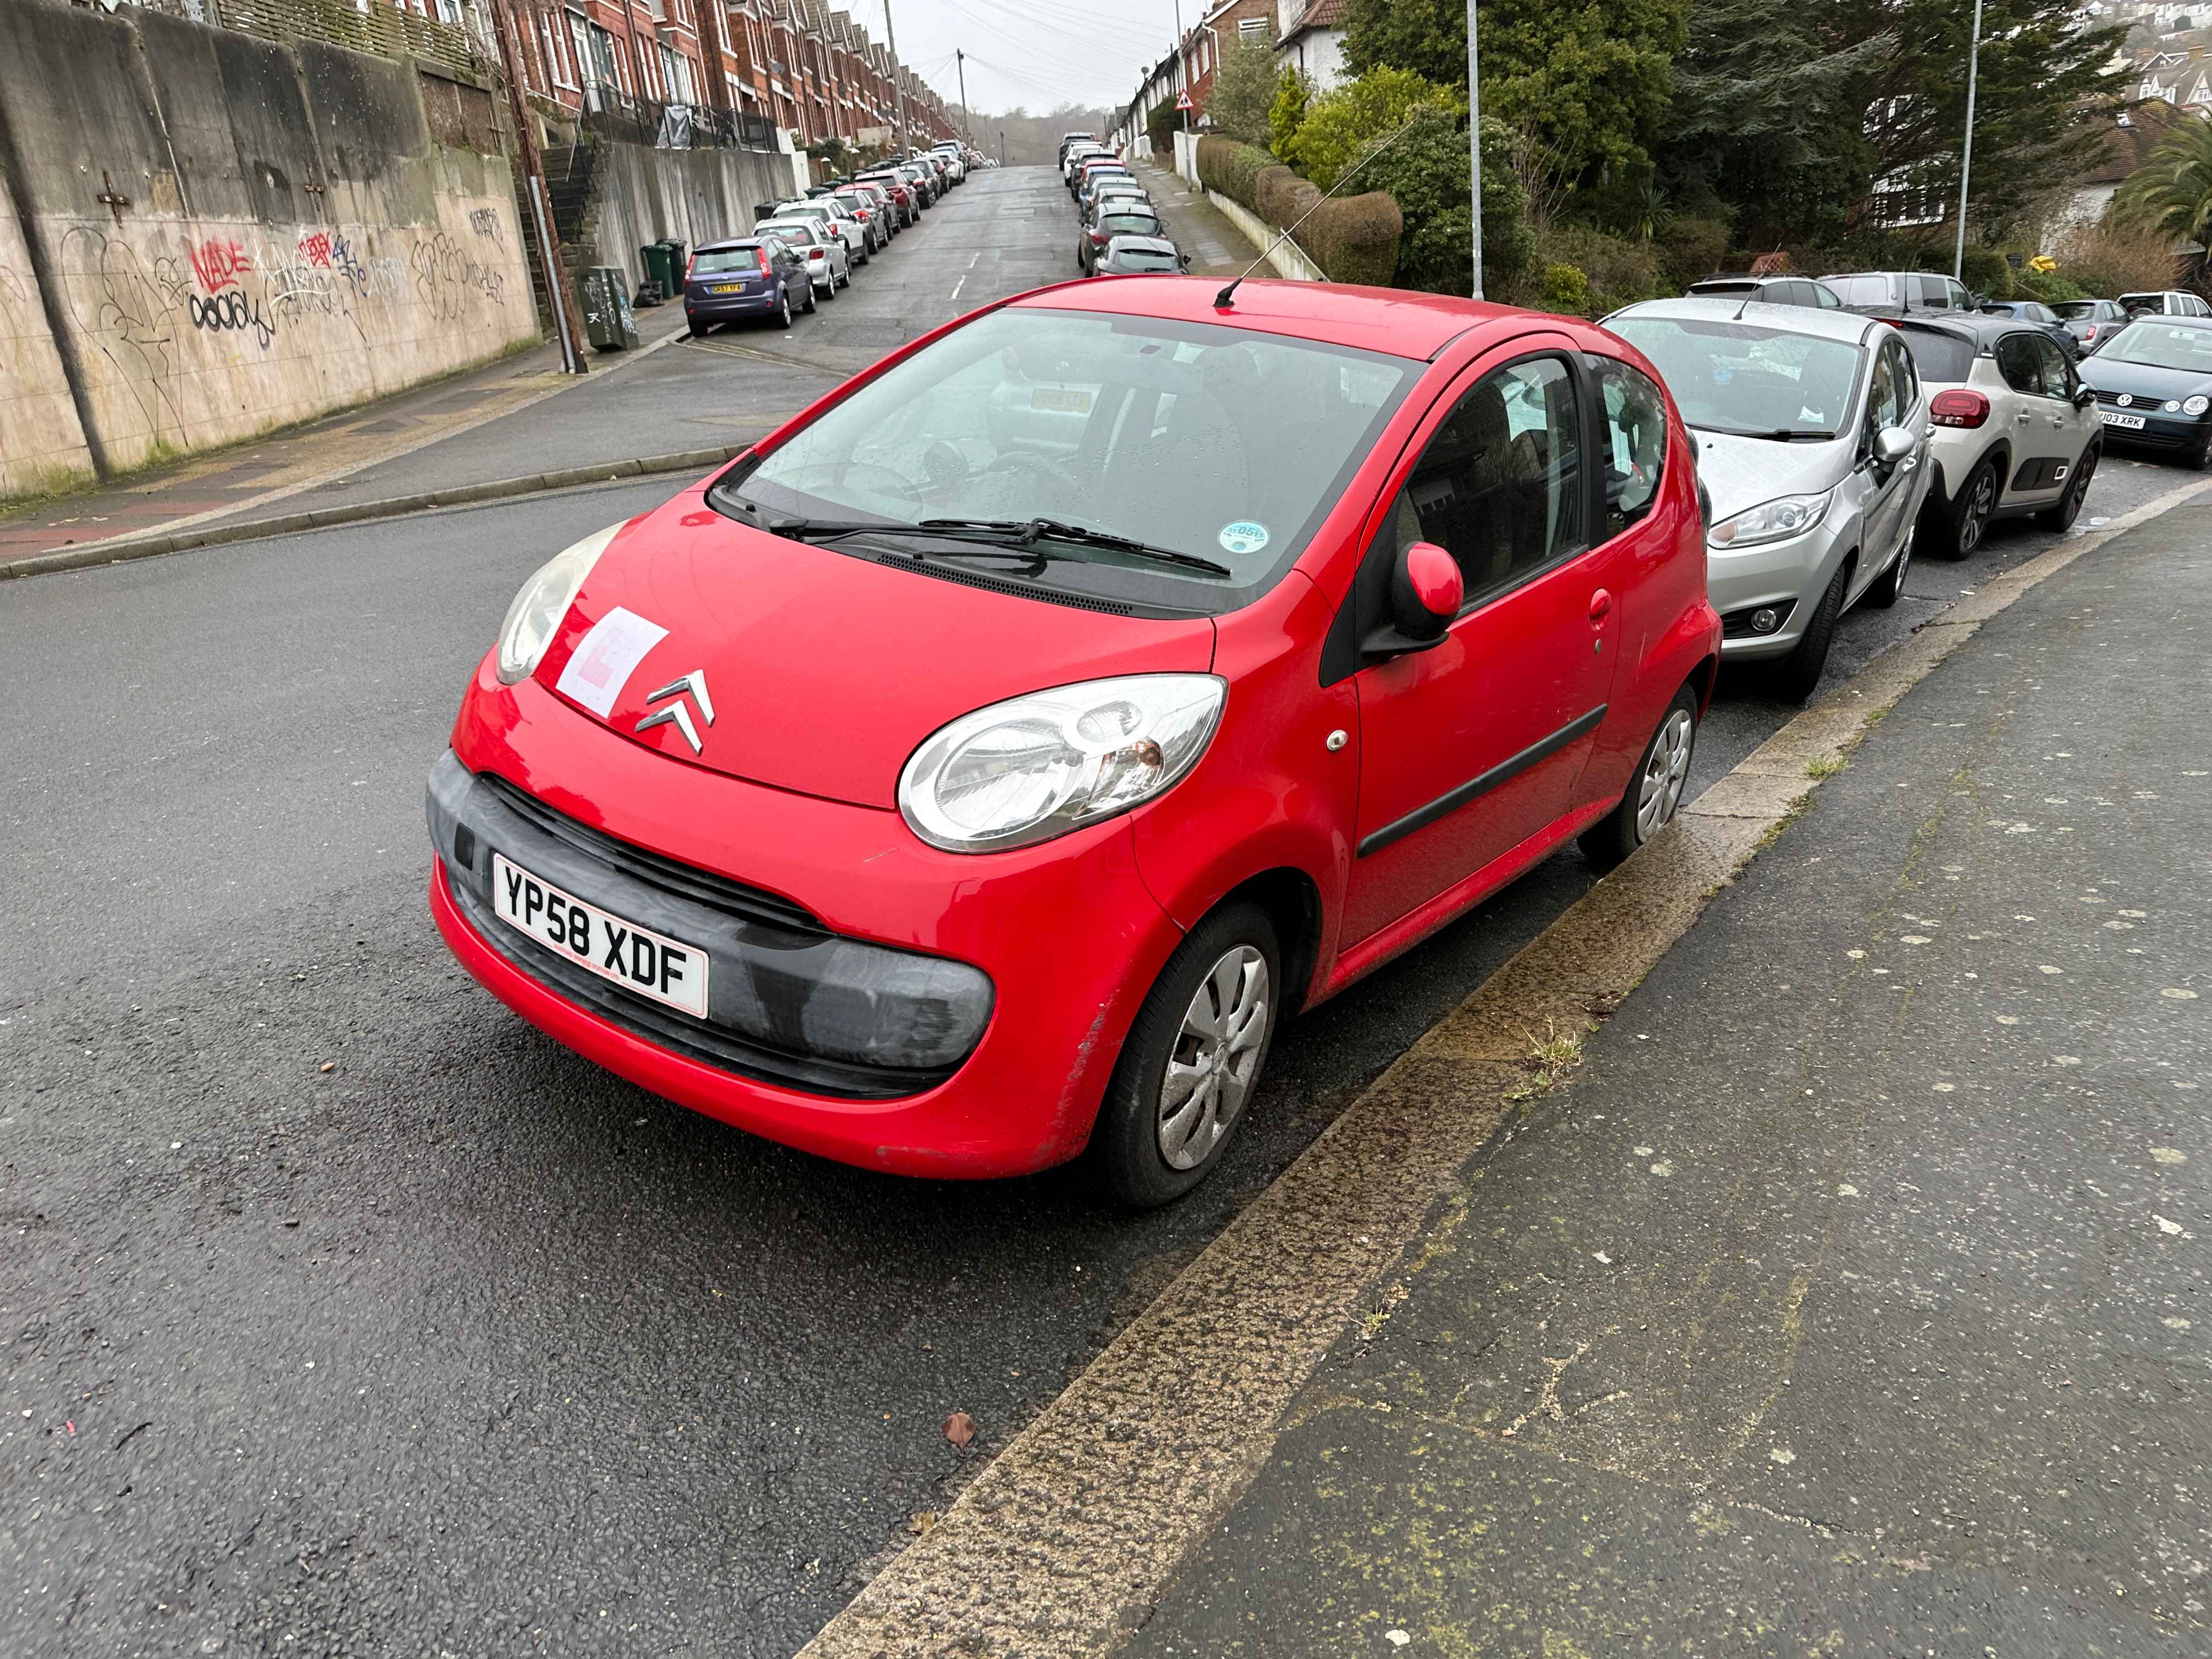 Photograph of YP58 XDF - a Red Citroen C1 parked in Hollingdean by a non-resident, and potentially abandoned. The fifth of five photographs supplied by the residents of Hollingdean.